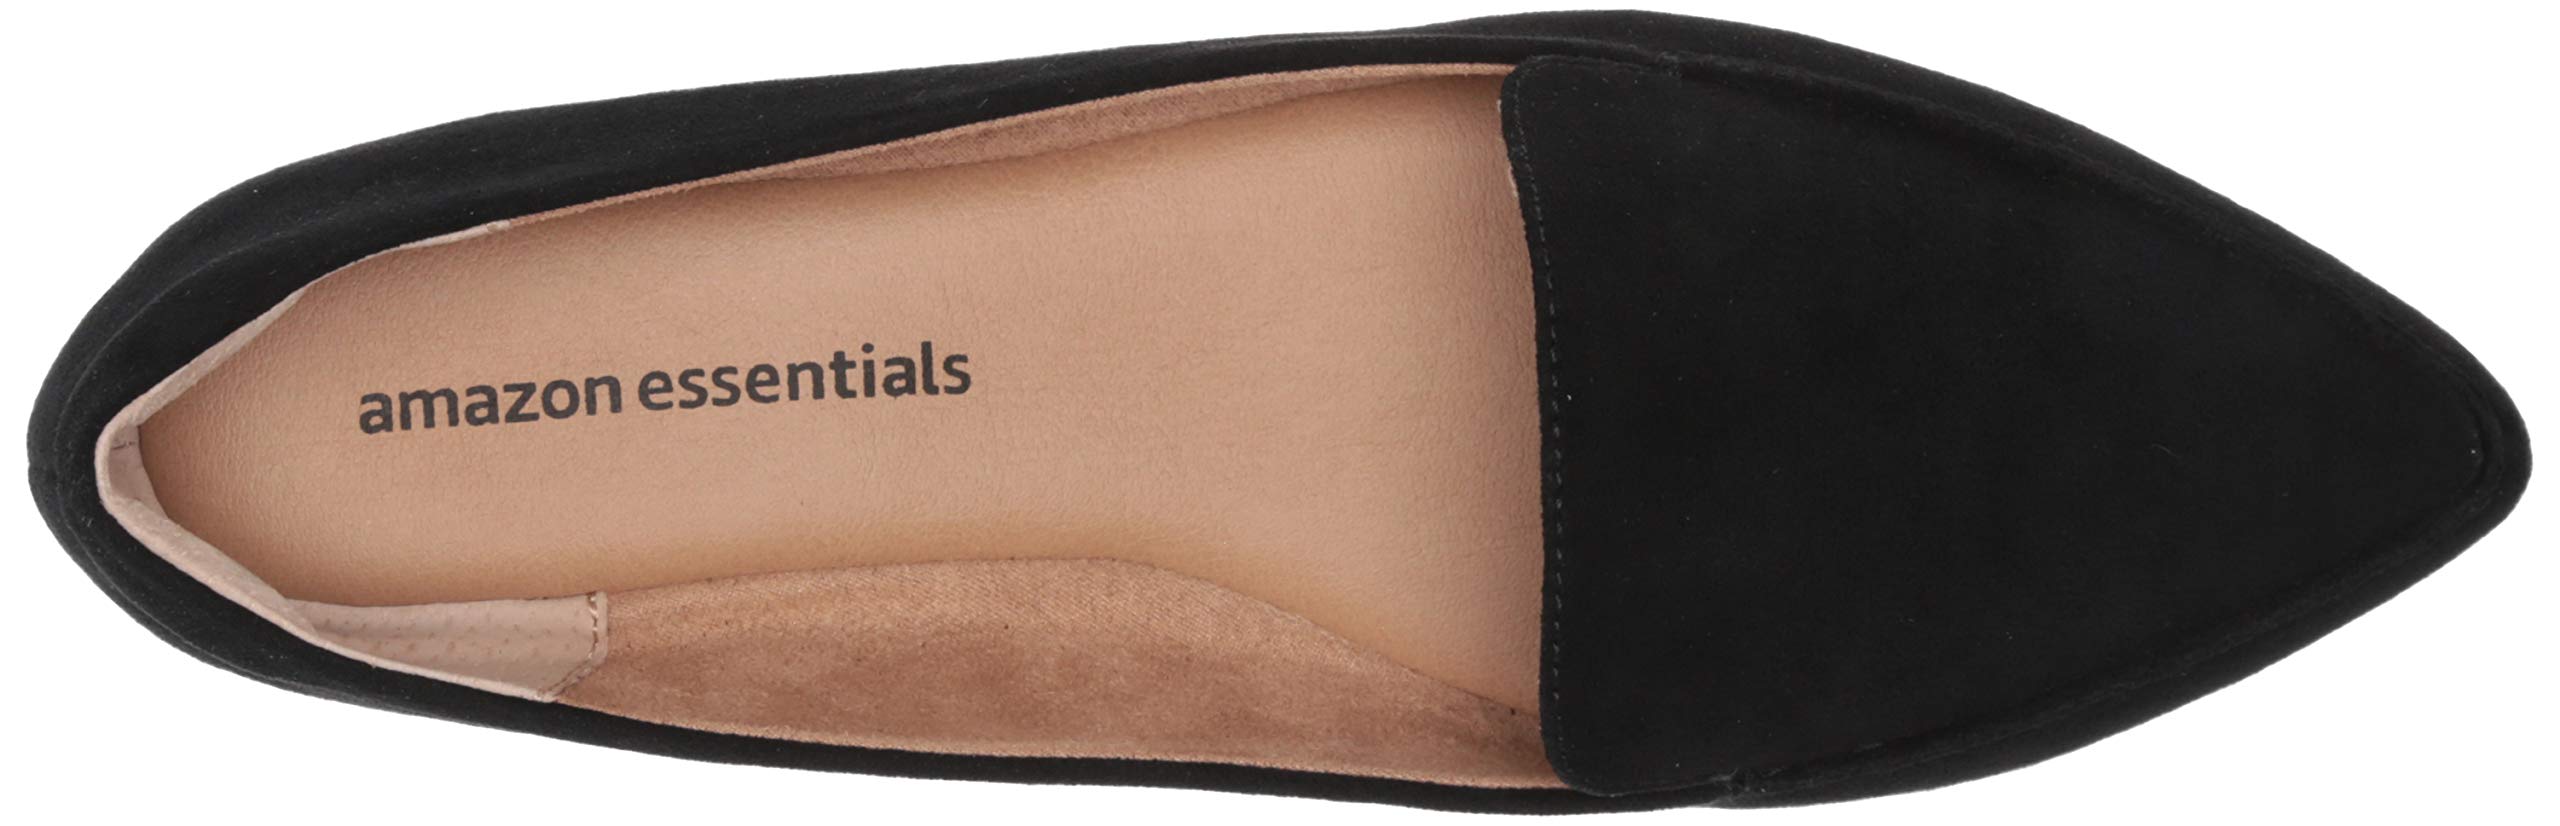 Amazon Essentials Women's Loafer Flat, Black Faux Leather, 10 Wide